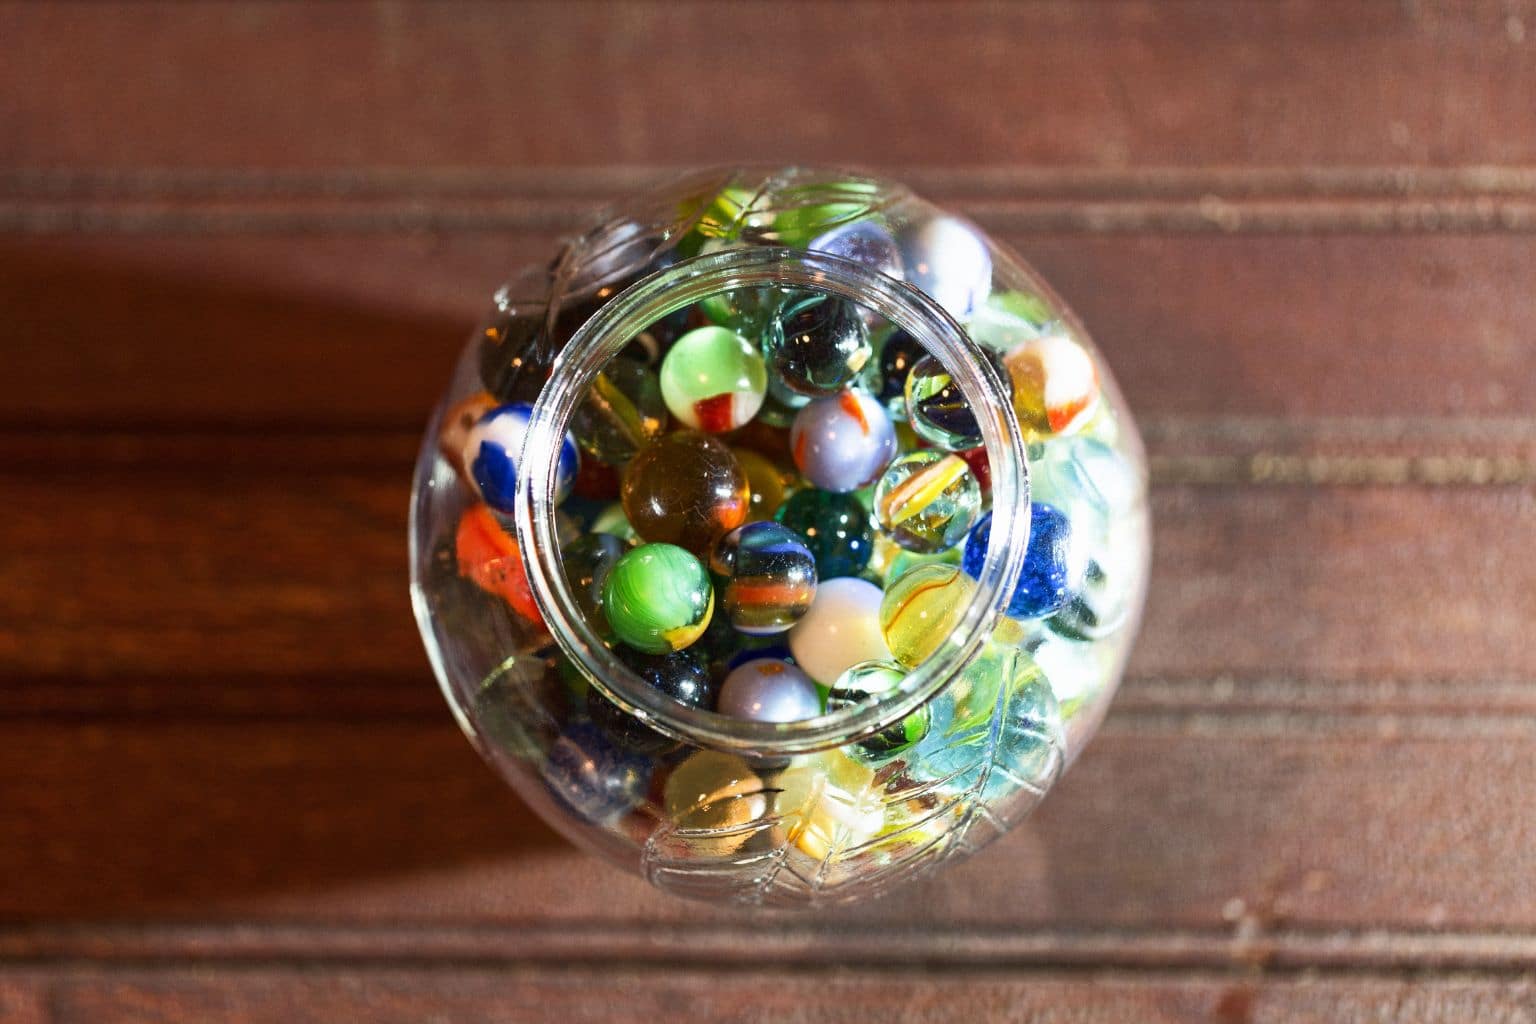 A jar of marbles